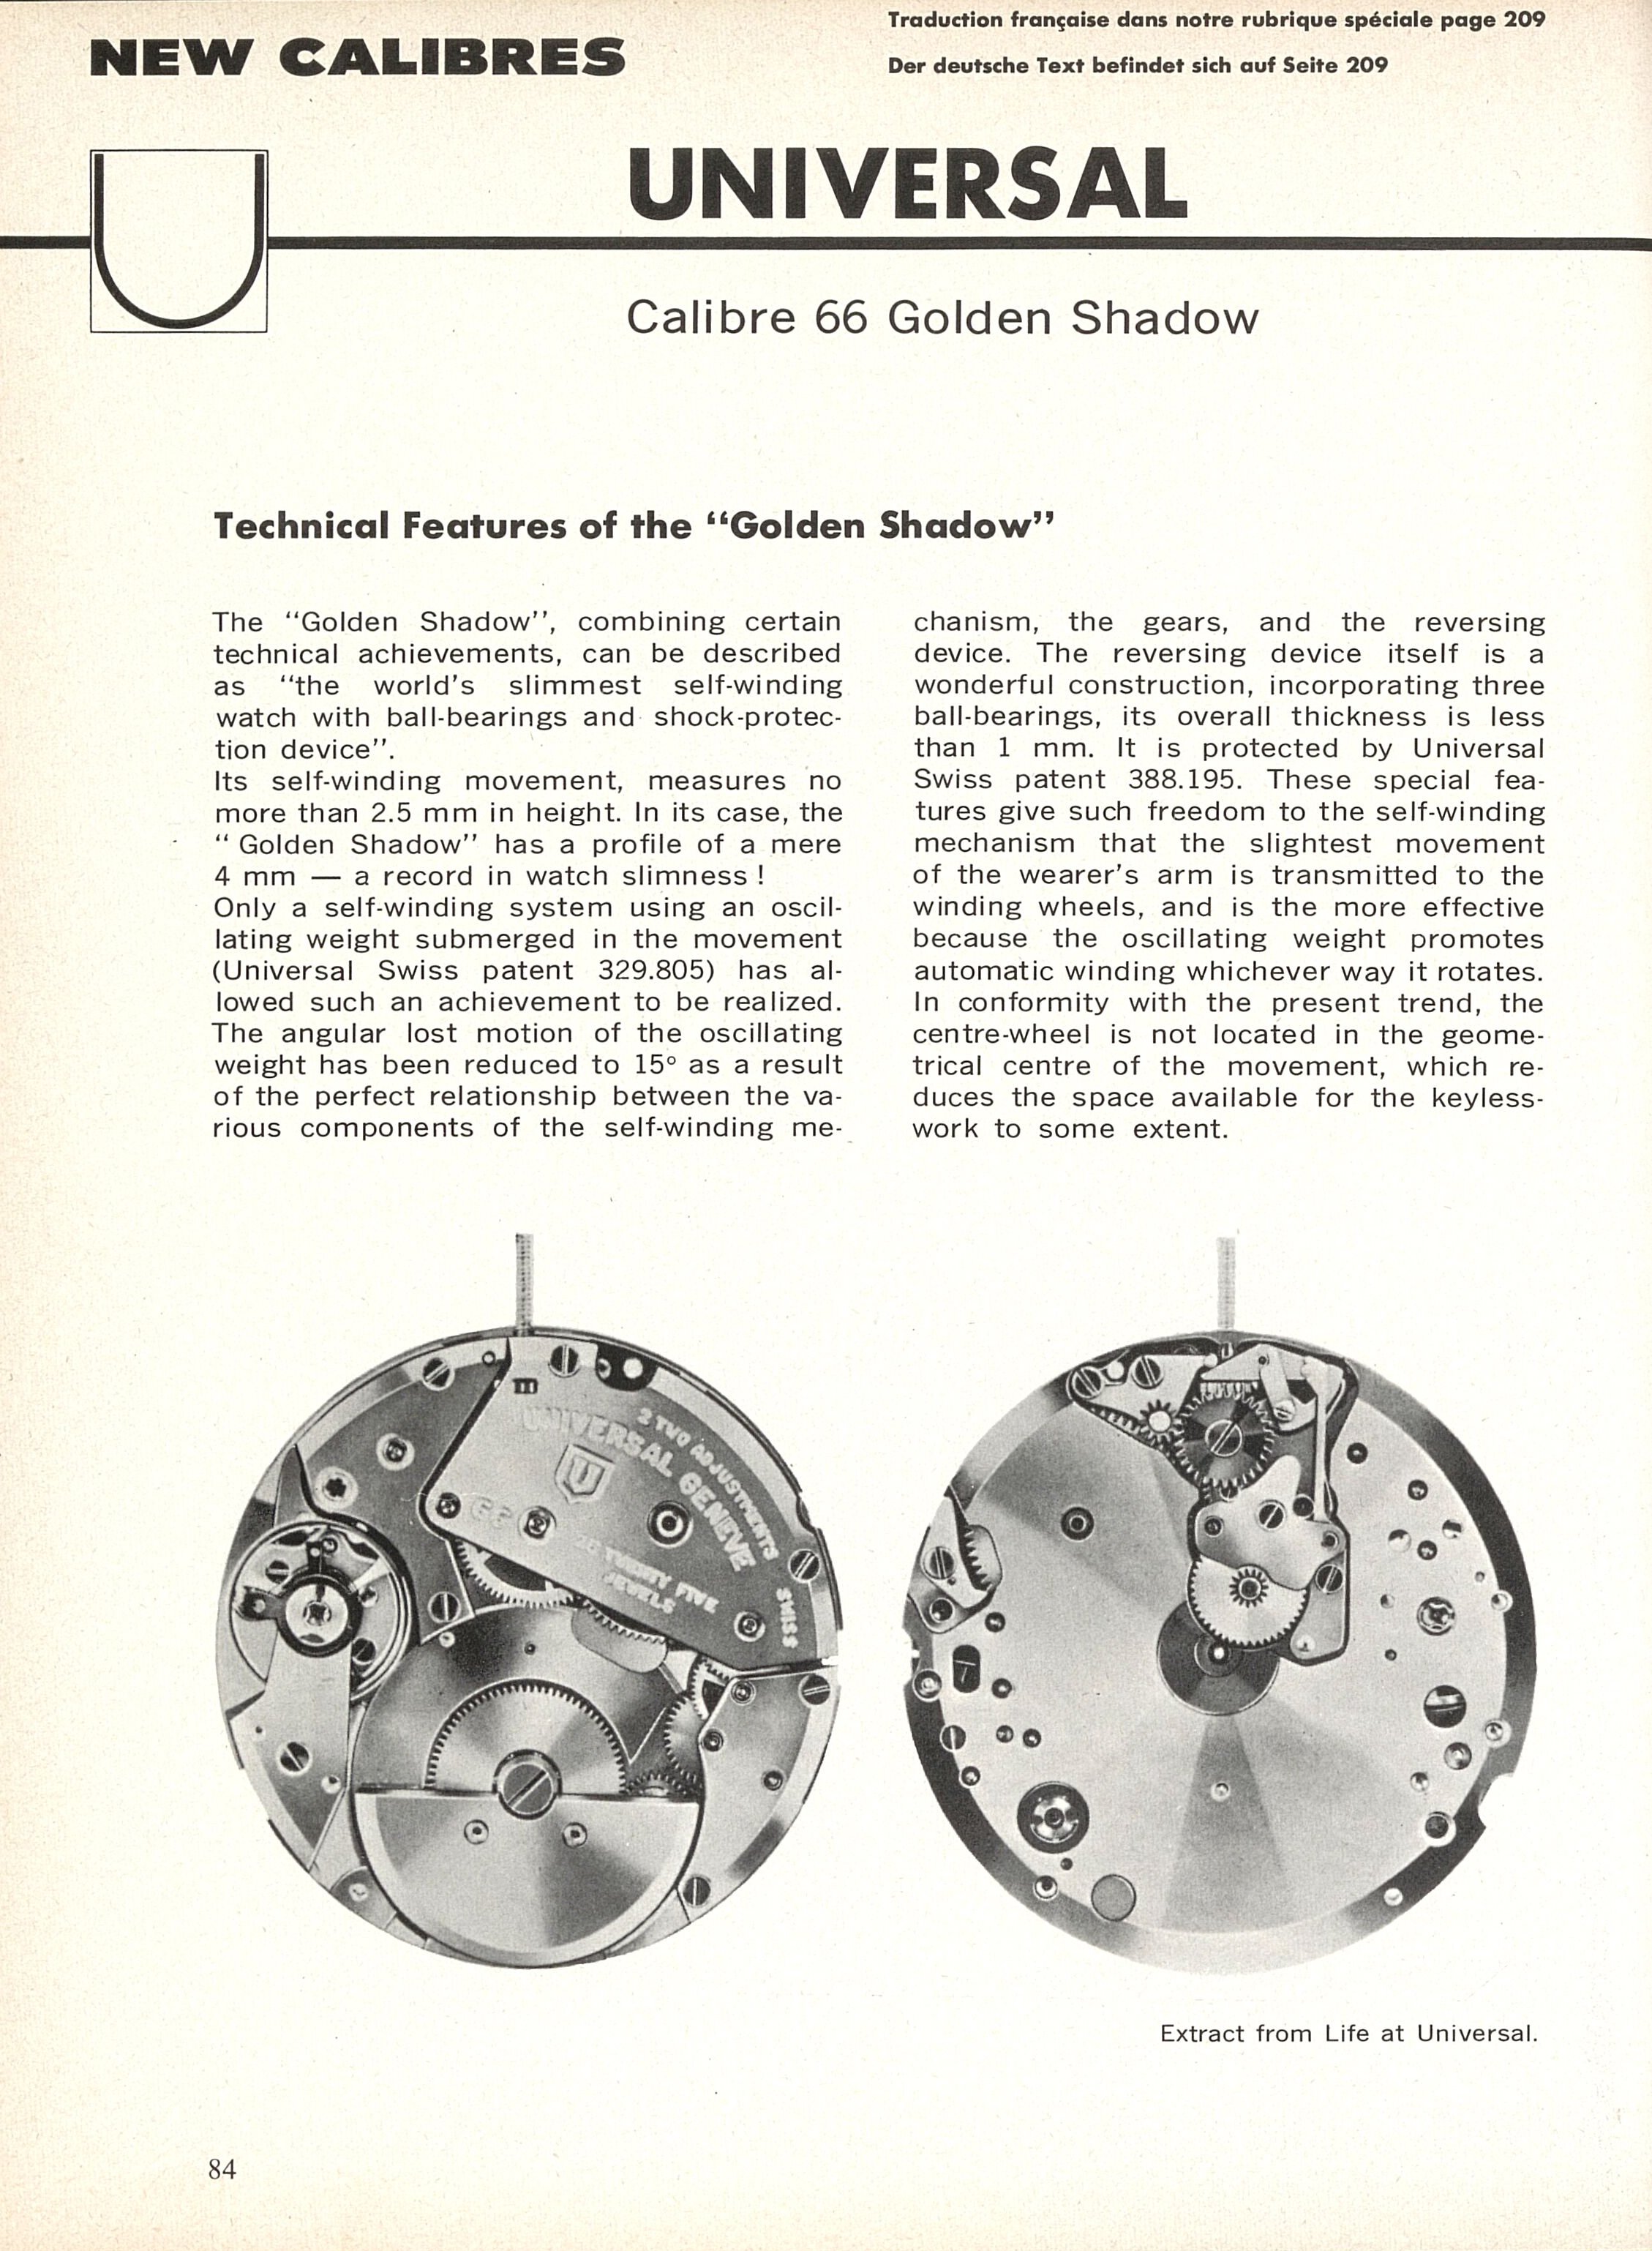 08_Universal Geneve advertising for the Golden Shadow watch published in Europa Star in 1966.jpg